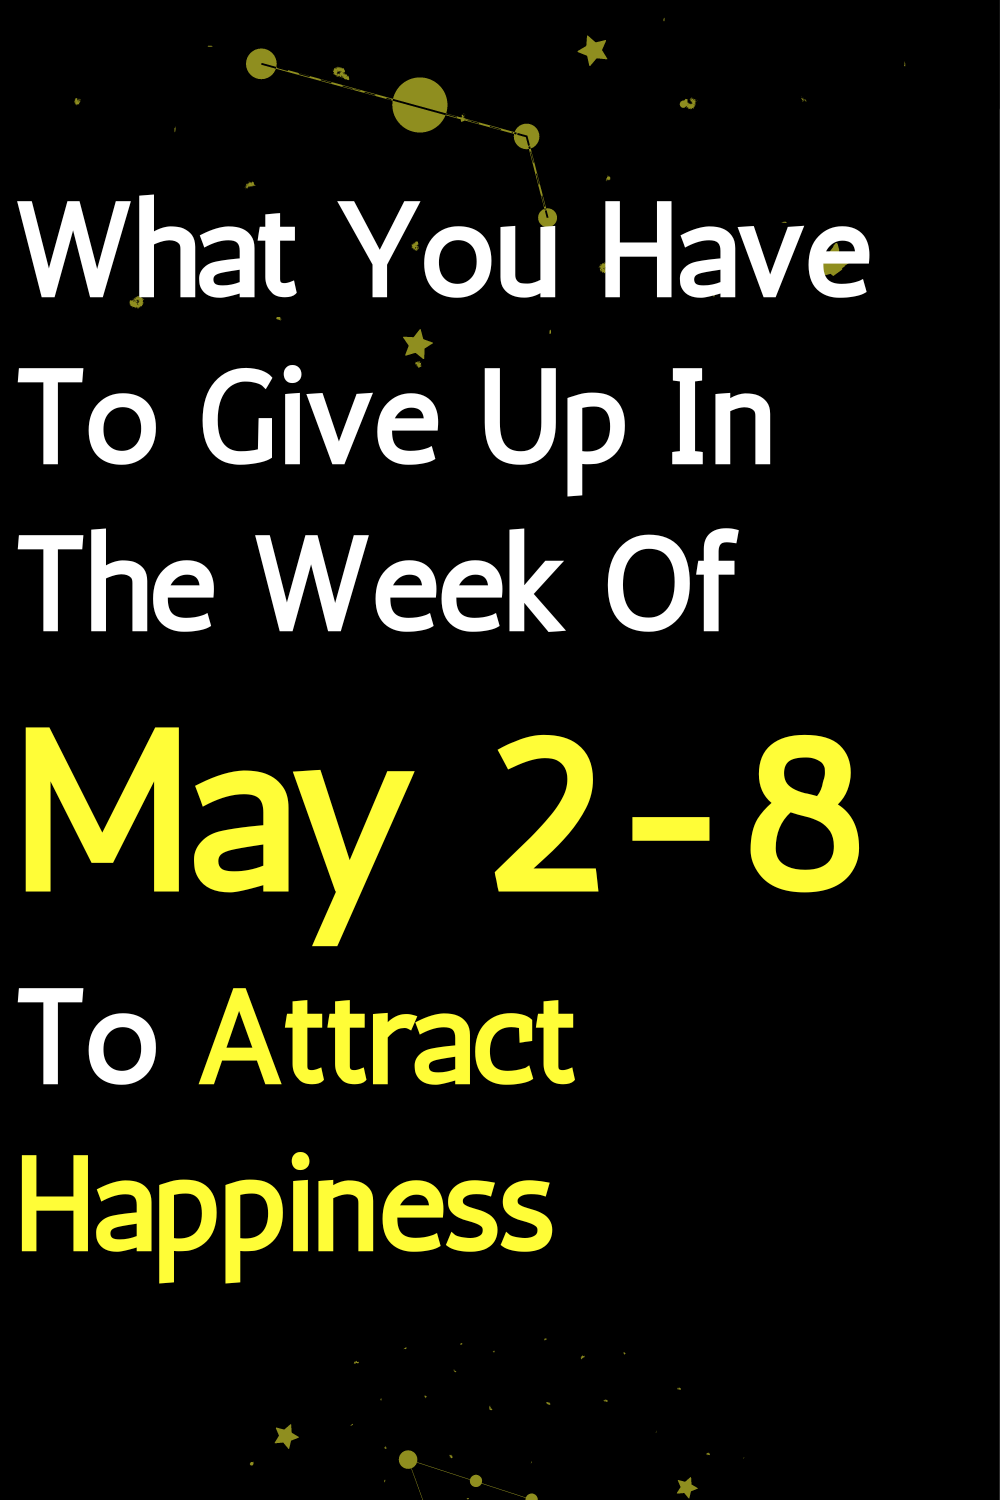 What You Have To Give Up In The Week Of May 2-8 To Attract Happiness